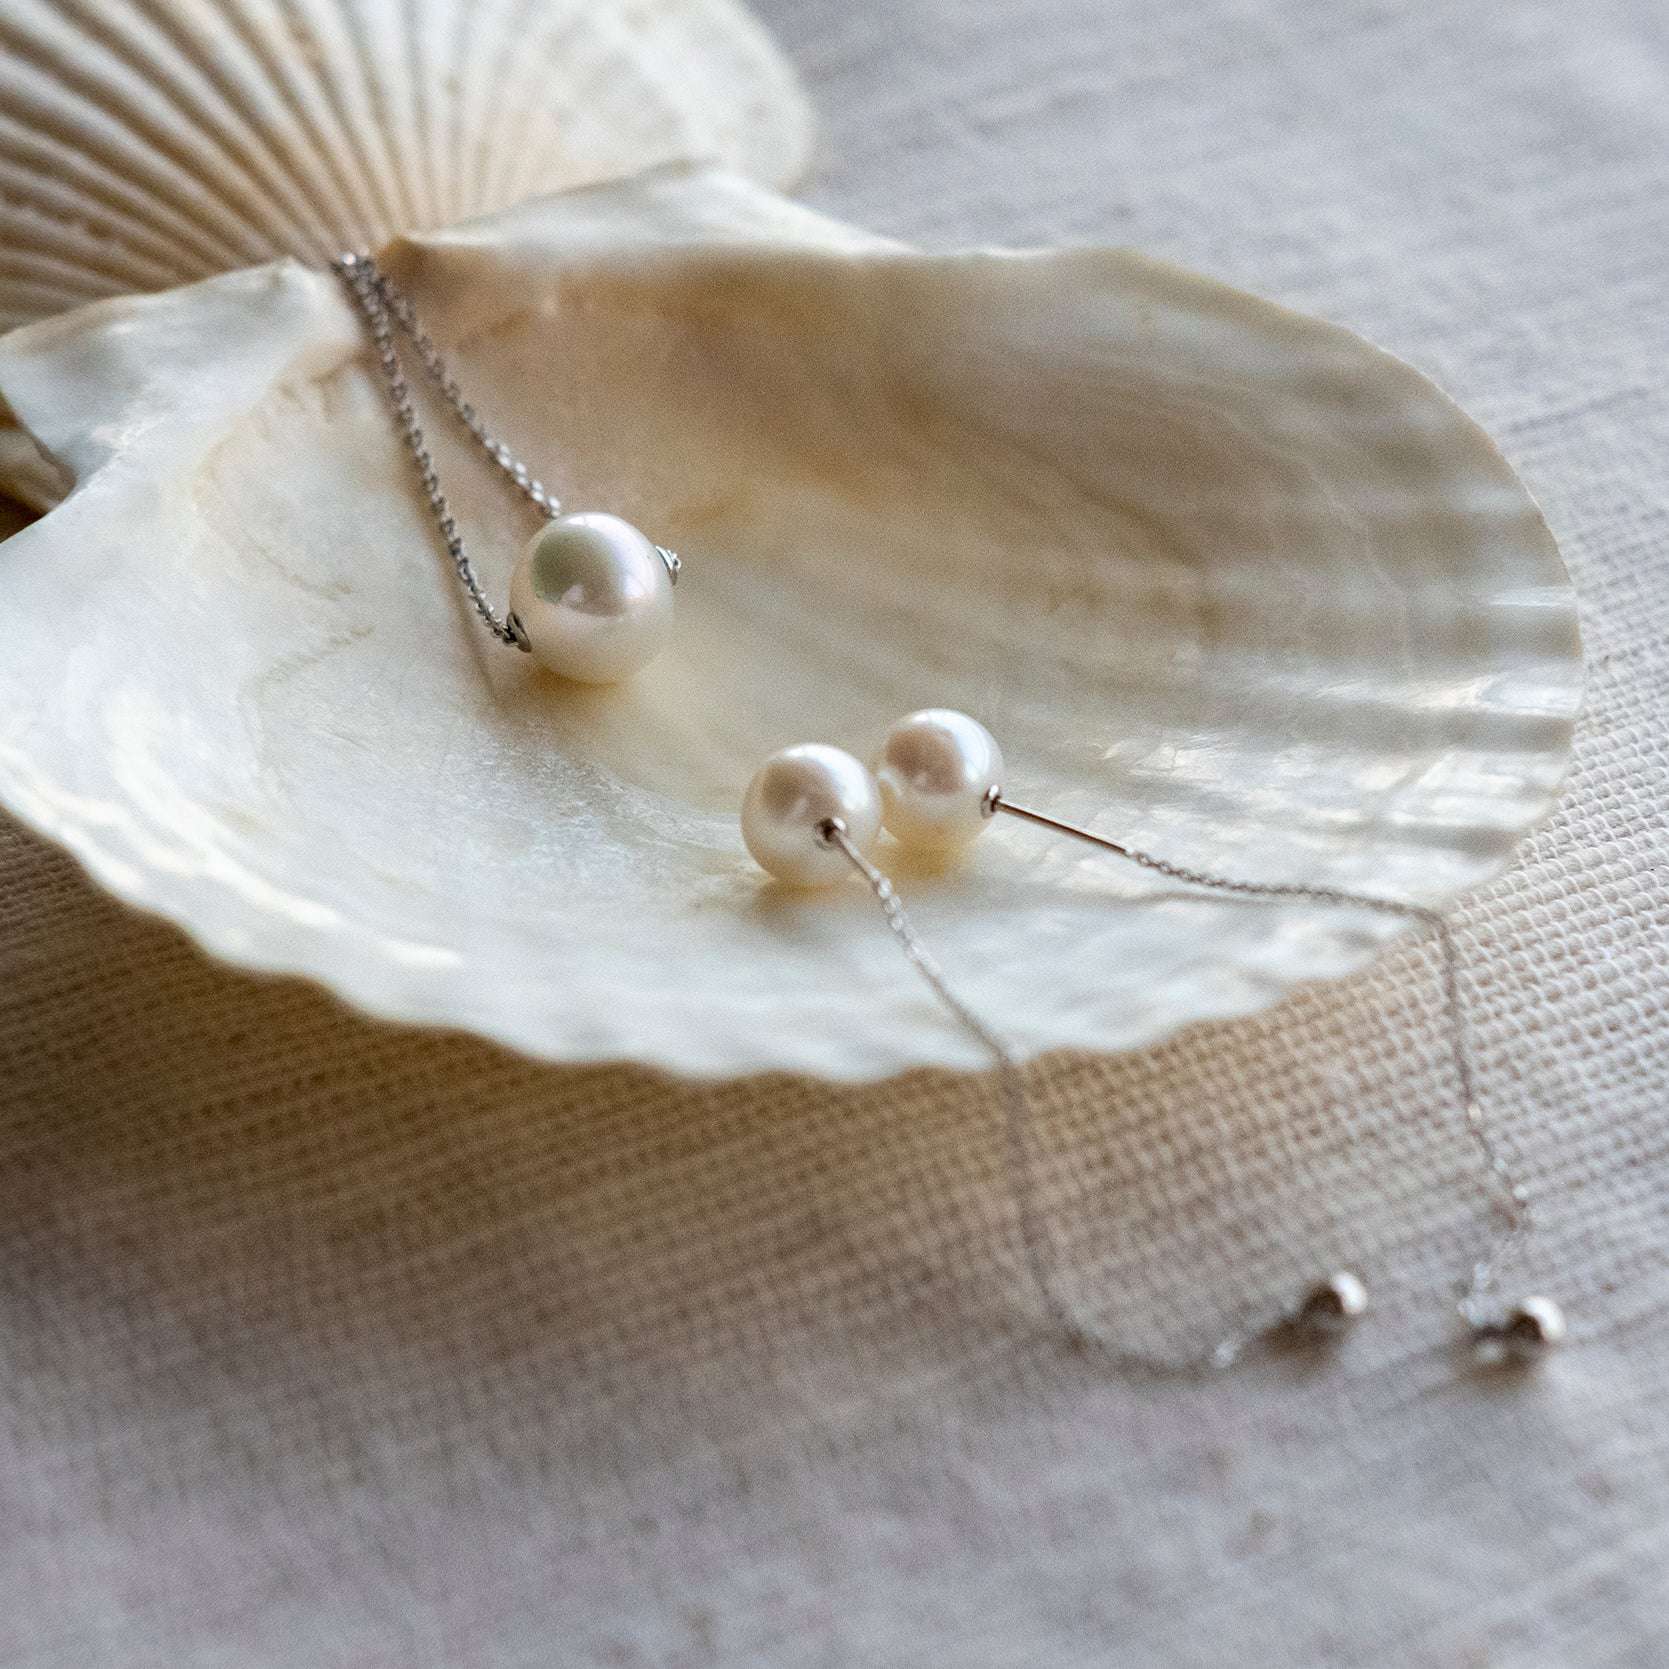 Floating Freshwater Pearl Necklace